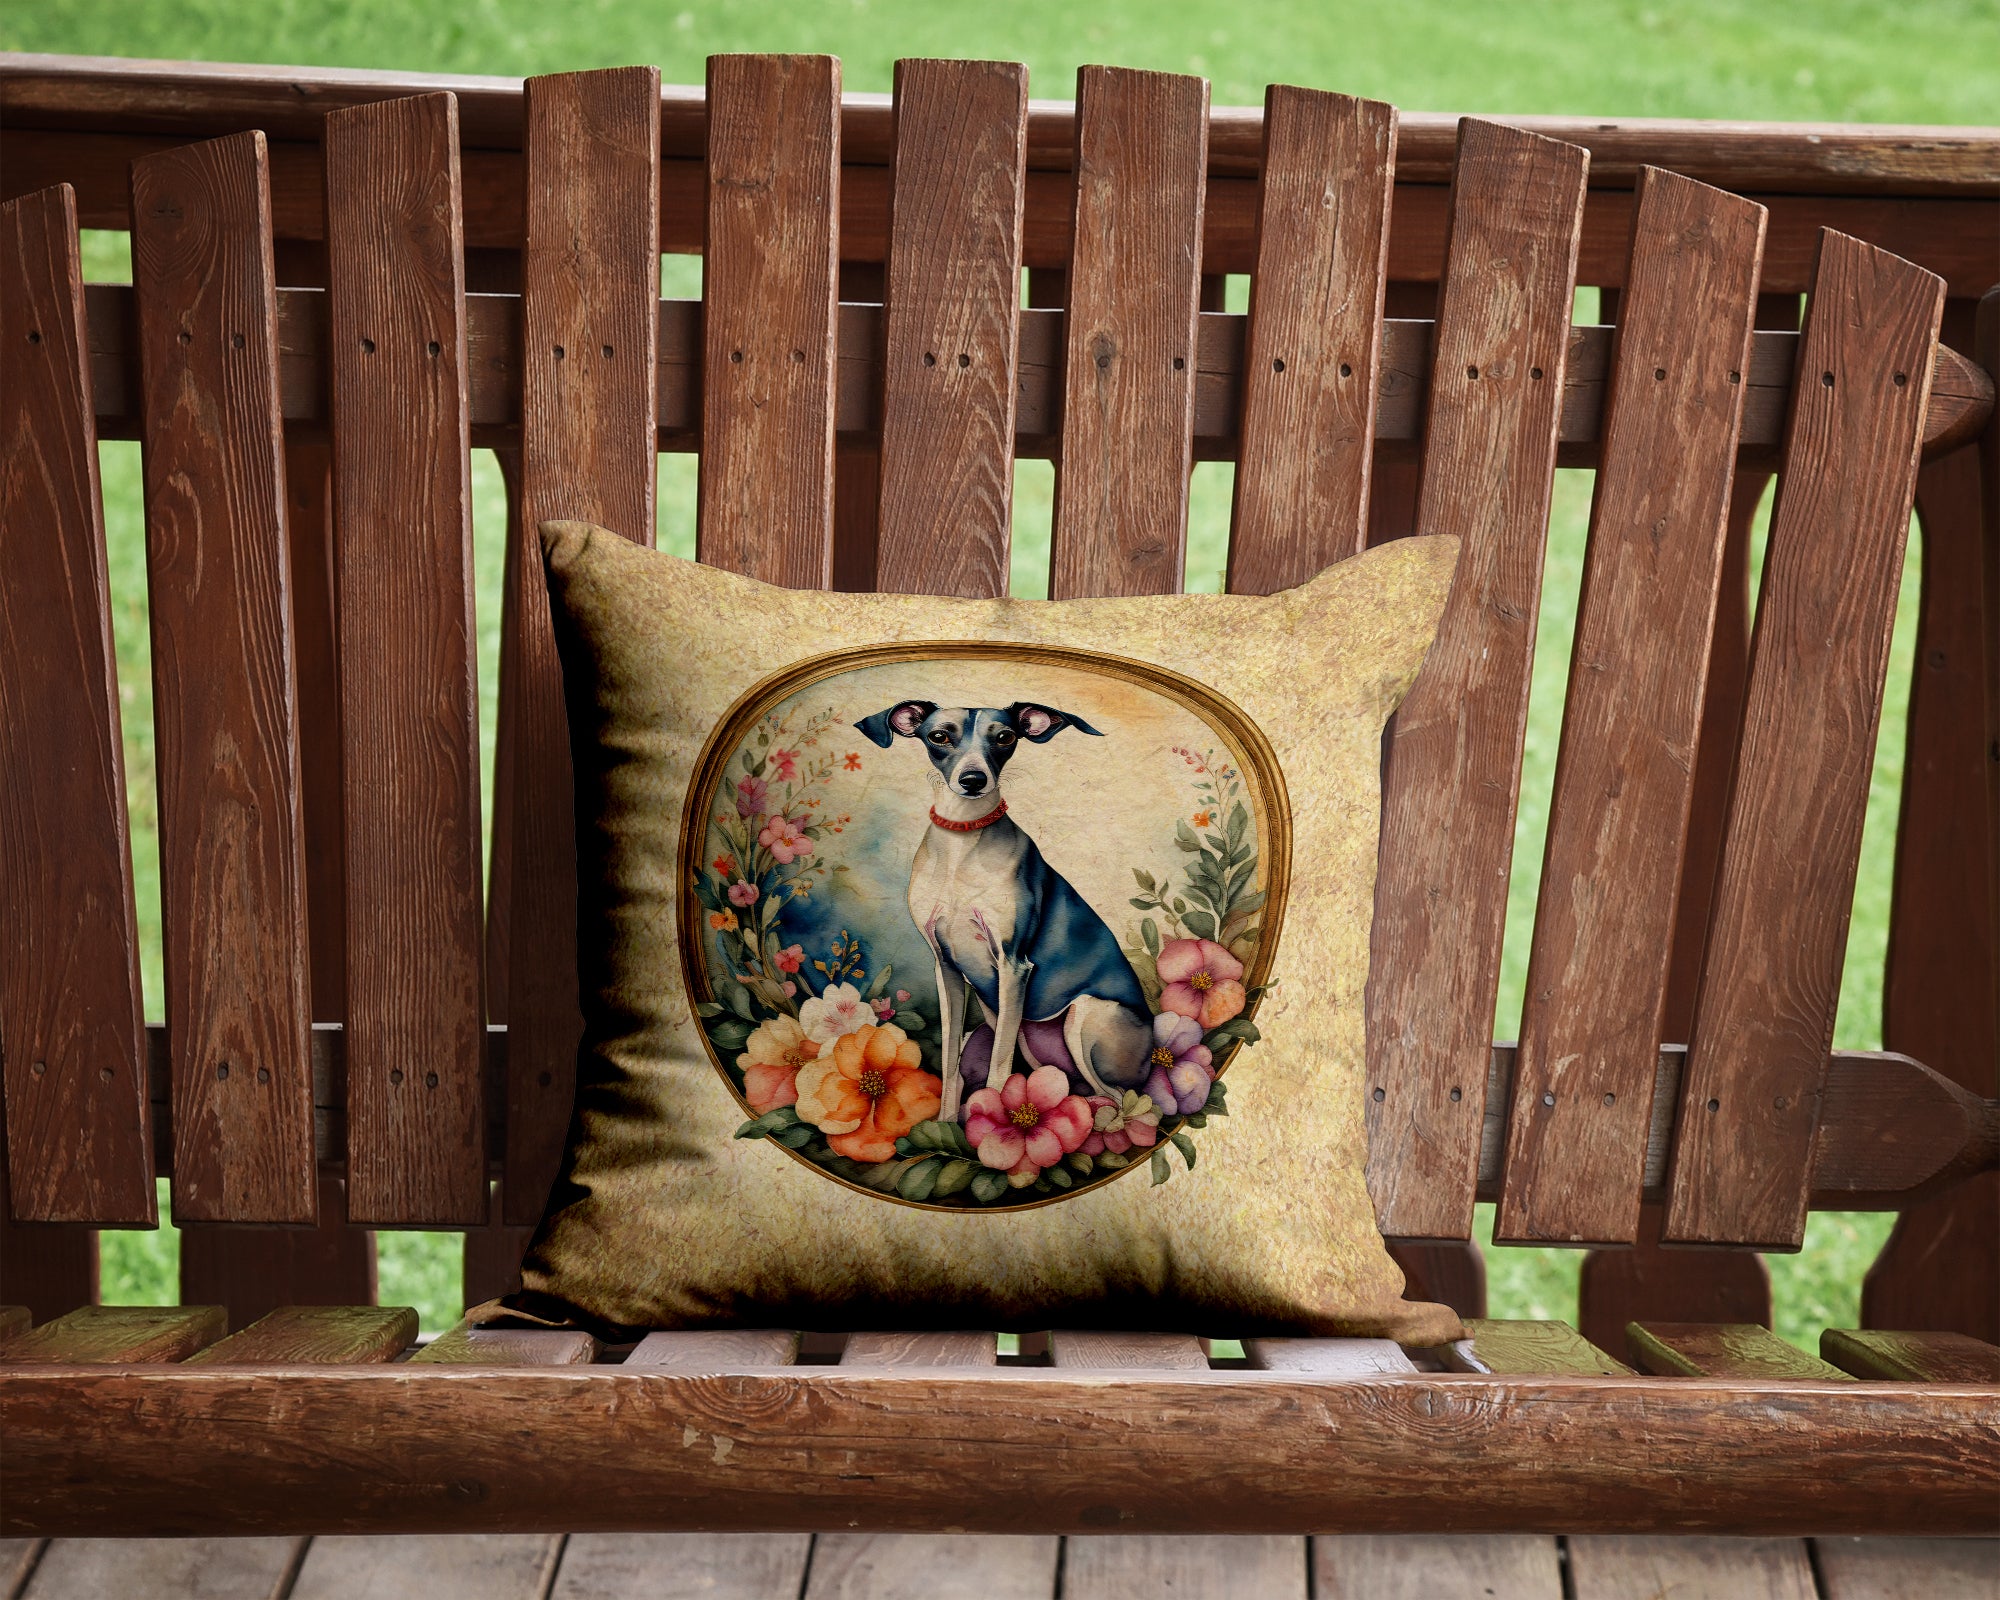 Buy this Italian Greyhound and Flowers Fabric Decorative Pillow